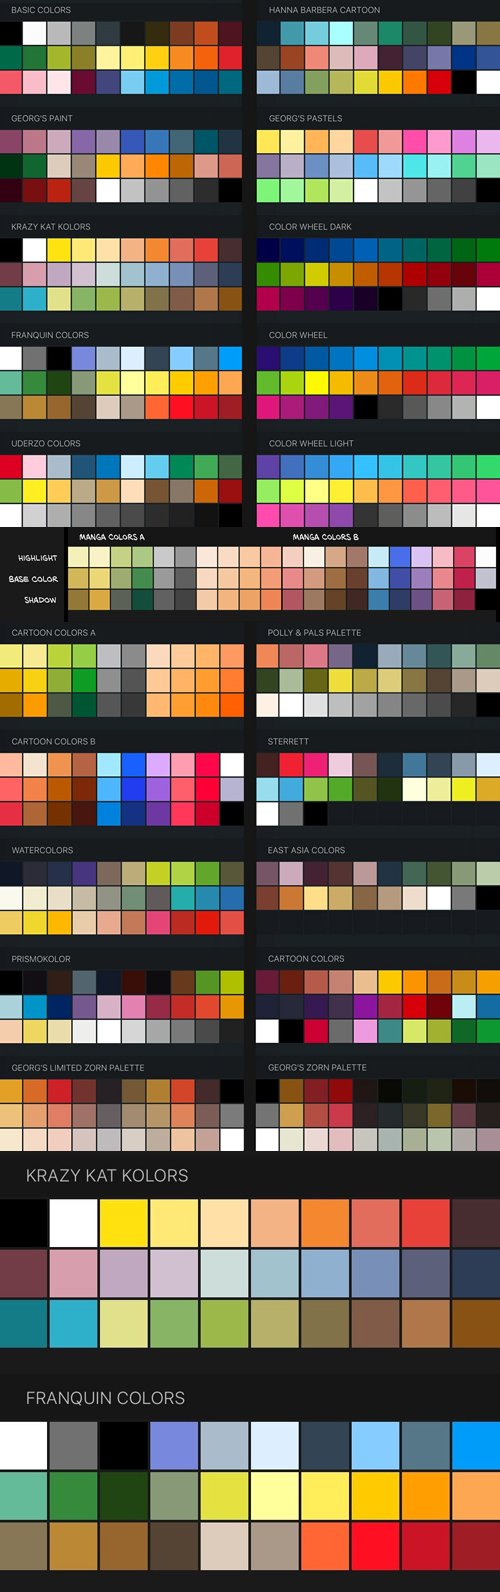 Download Procreate Color Swatches 22 Palettes for